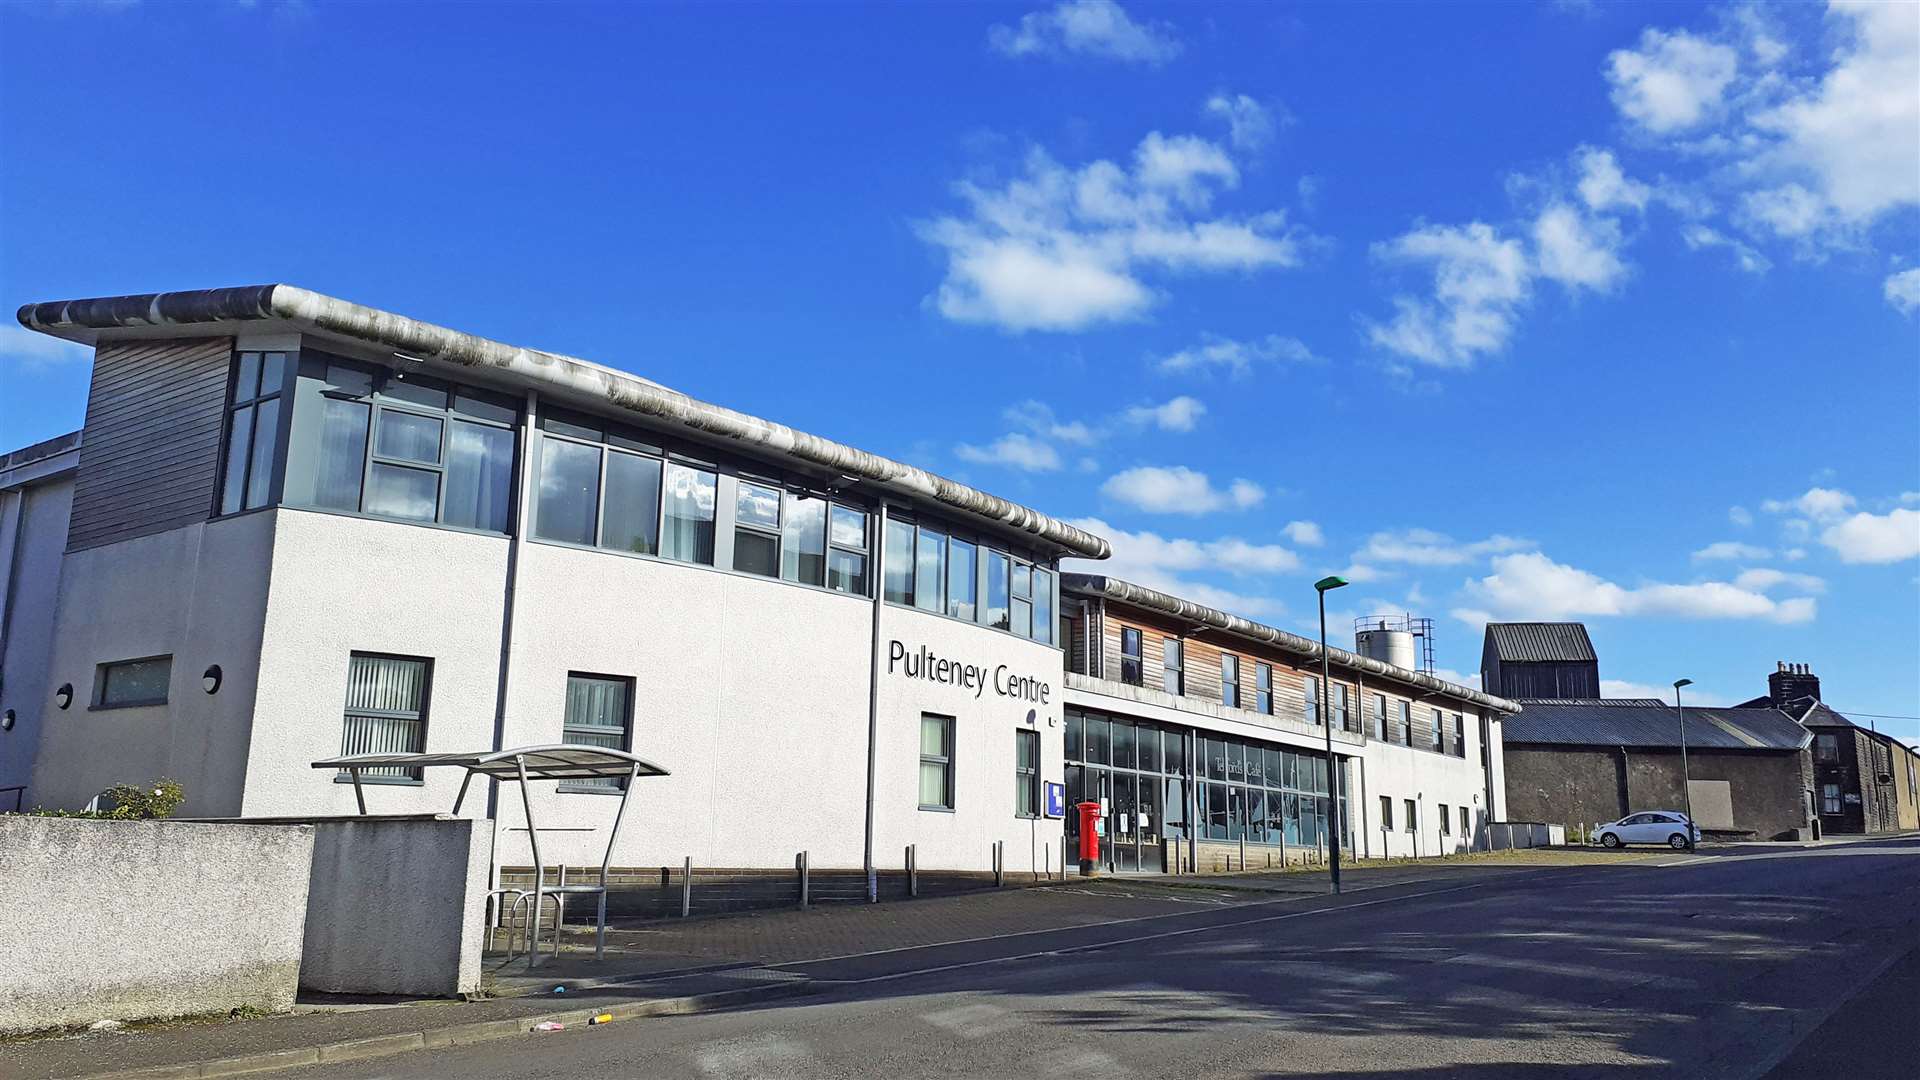 PPP Childcare Service is based at the Pulteney Centre in Huddart Street.